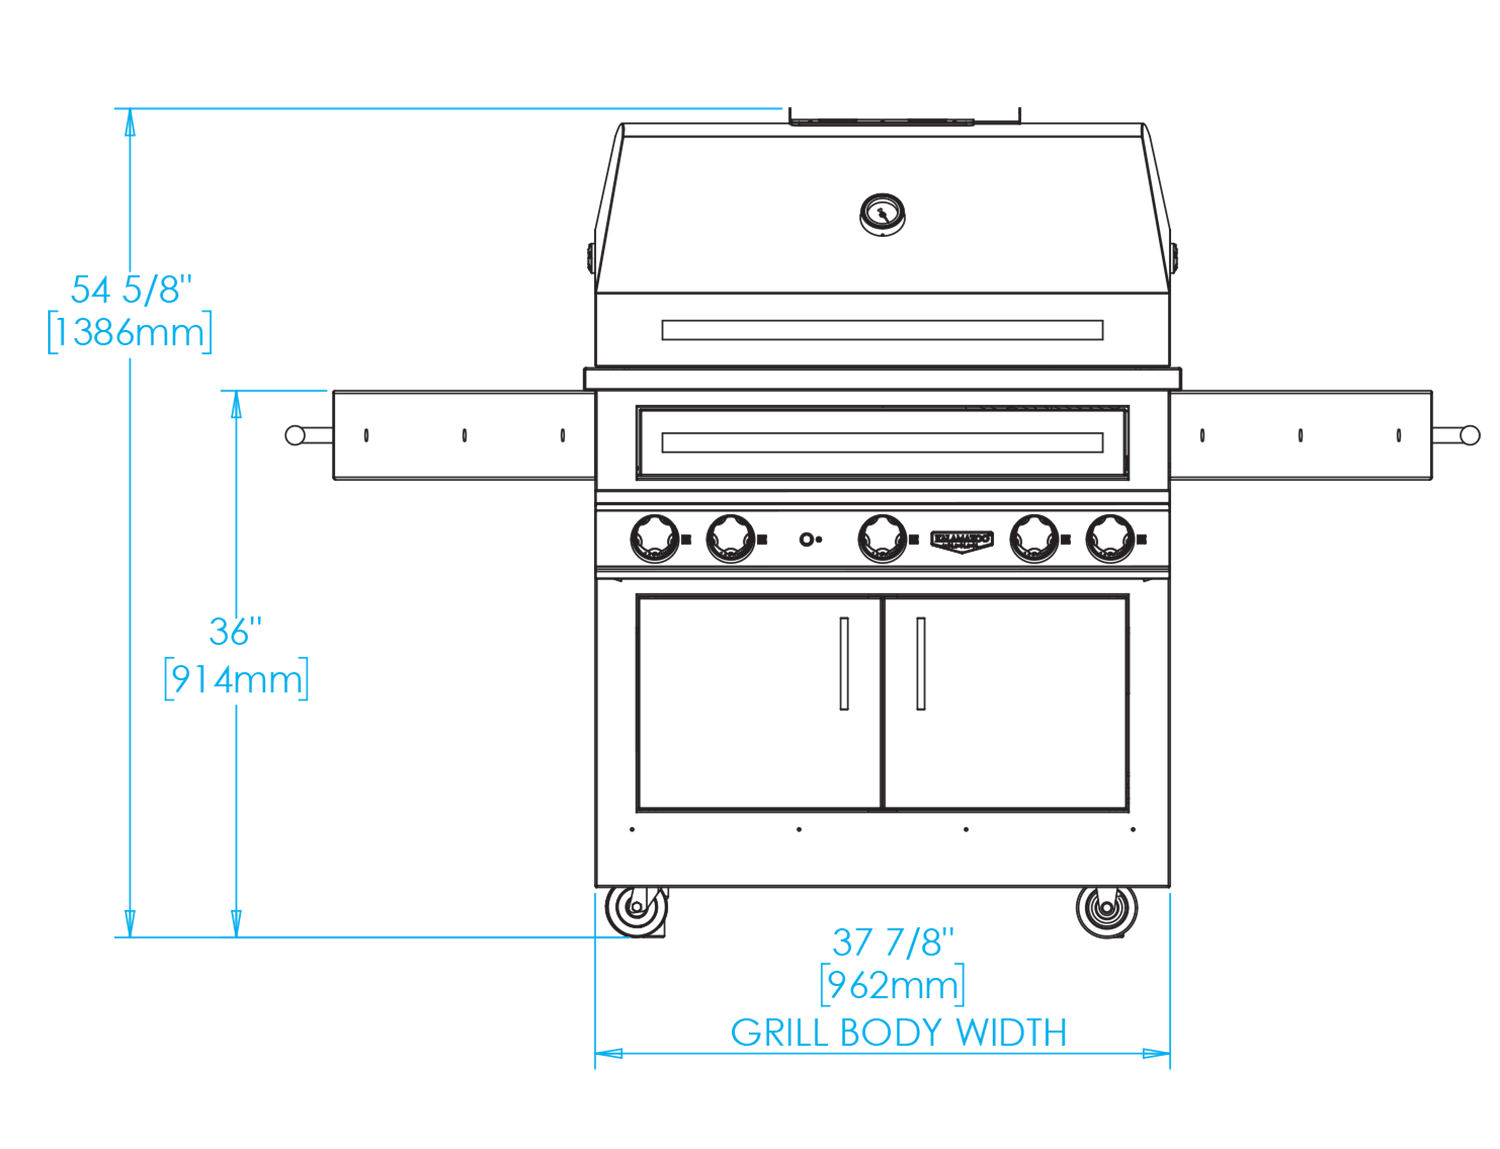 K750HT Freestanding Hybrid Fire Grill Dimensions Image